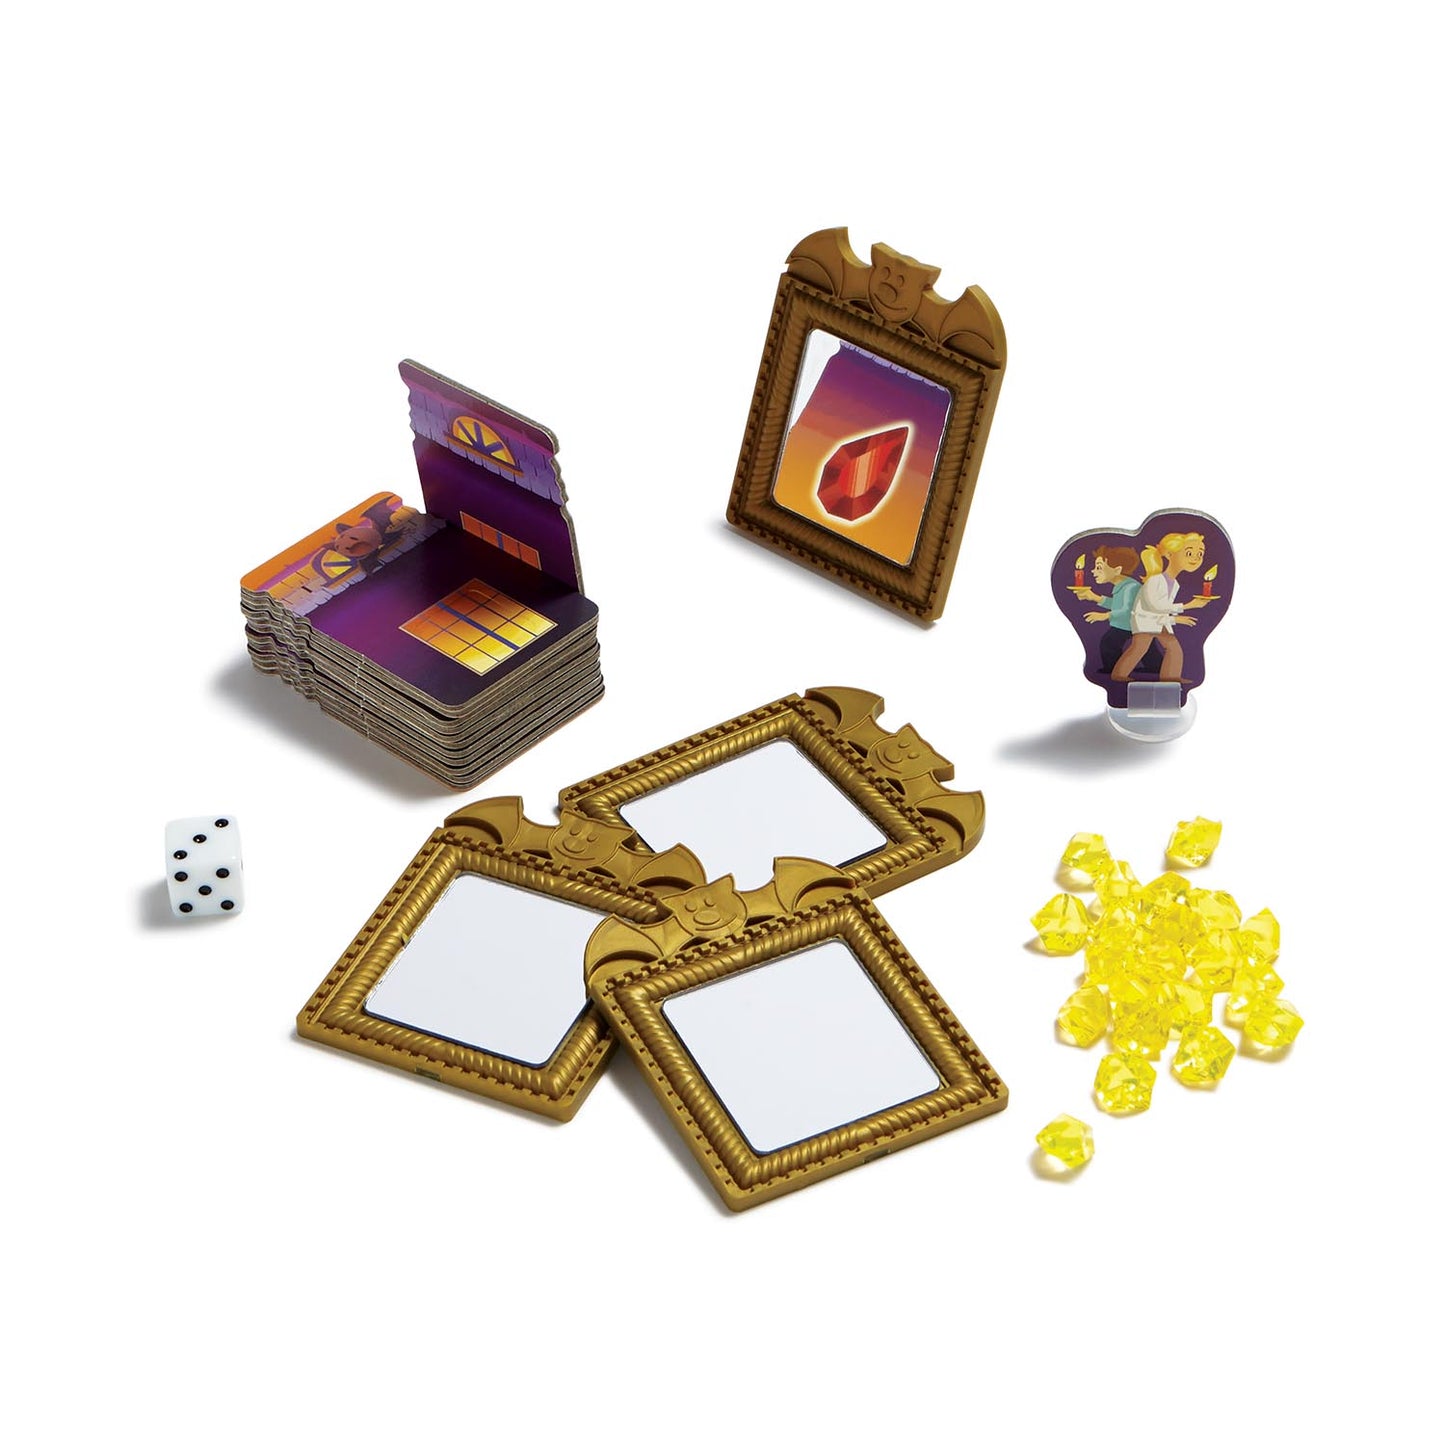 Mirror Mansion: Geometry game and memory game